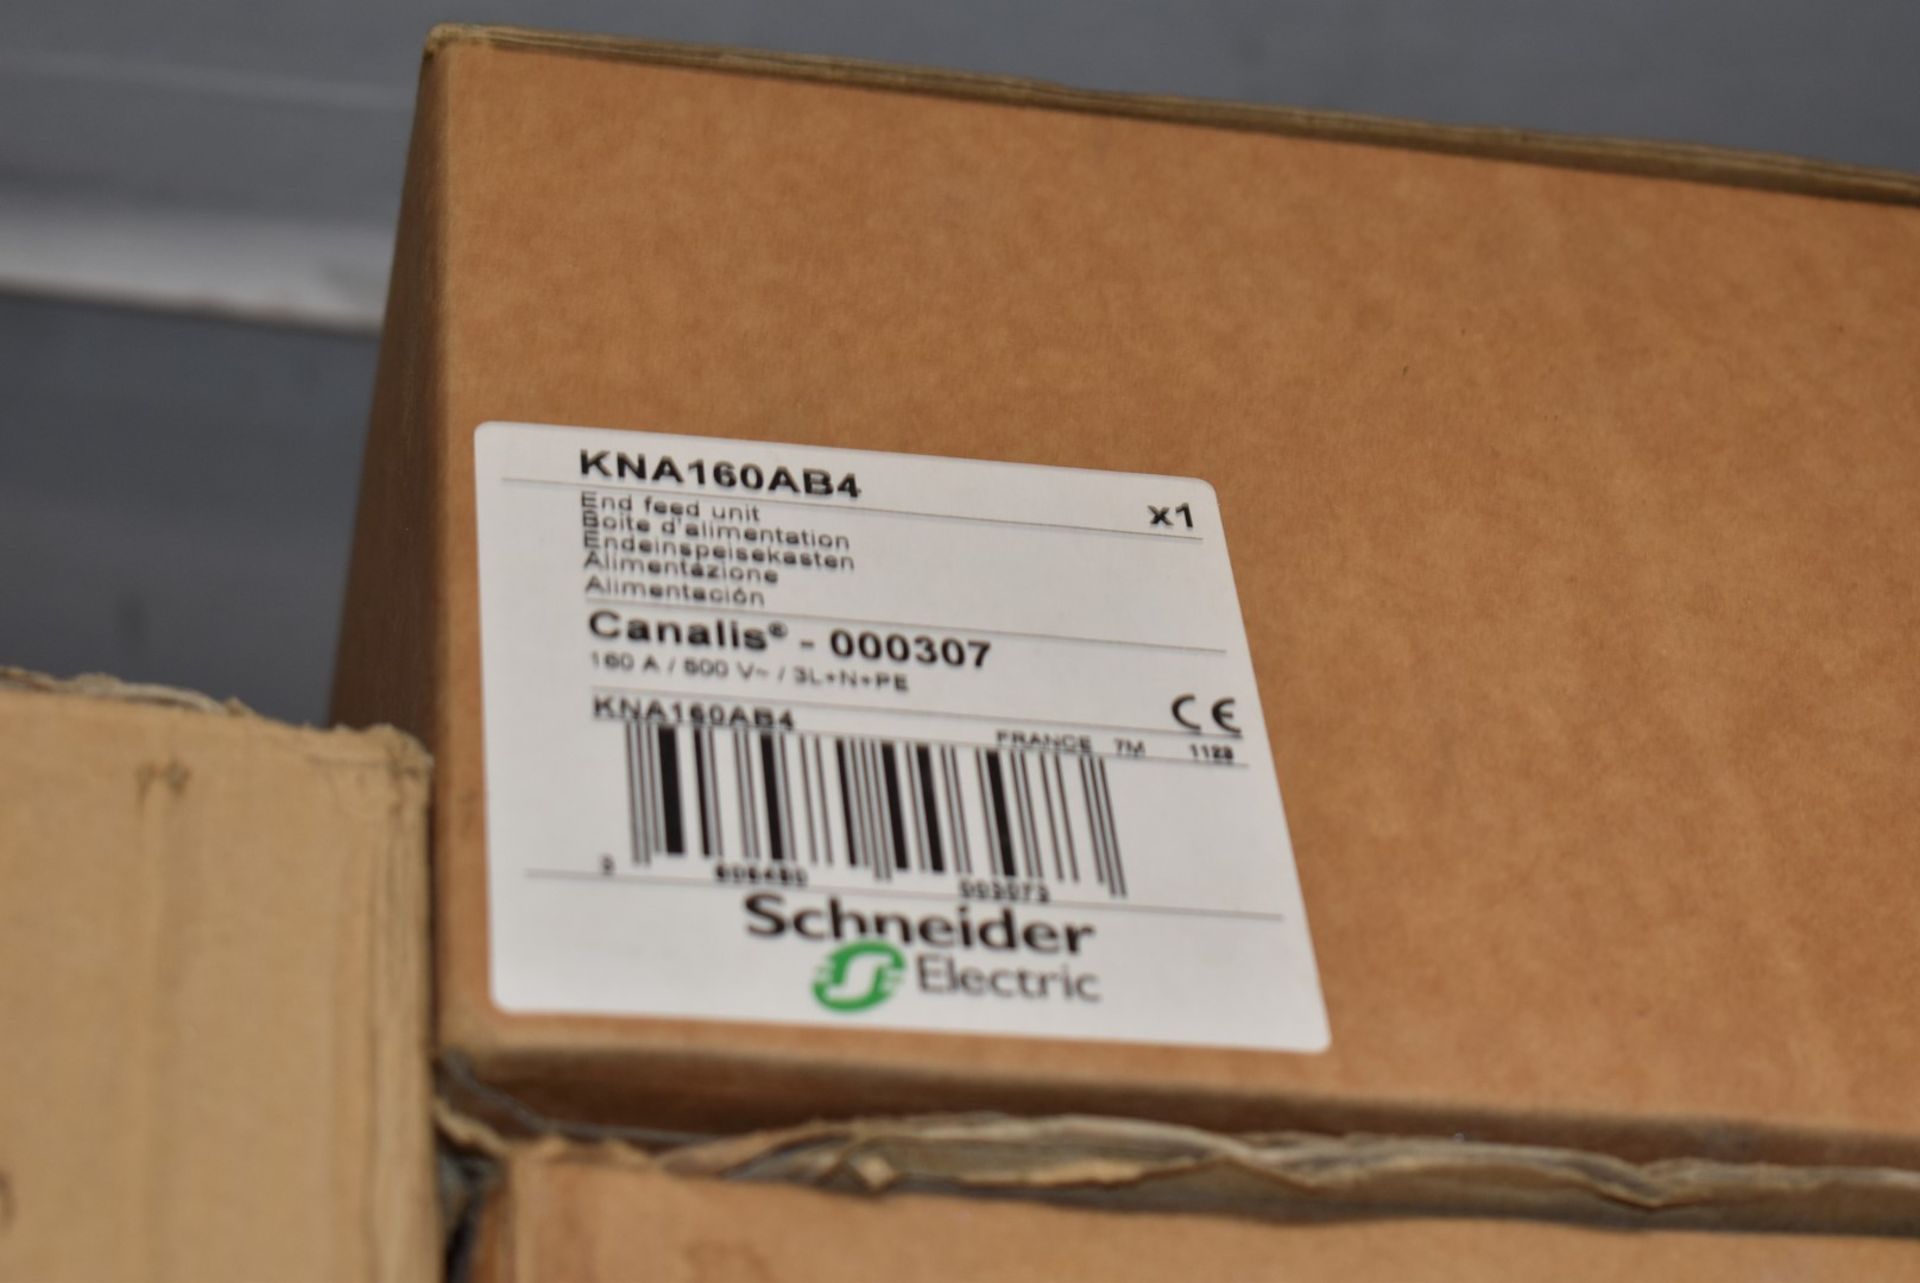 3 x Schneider Electric Canalis End Feed Units - Types KSA250AB4 & KNA160AB4 - RRP £1,360 - Image 6 of 7